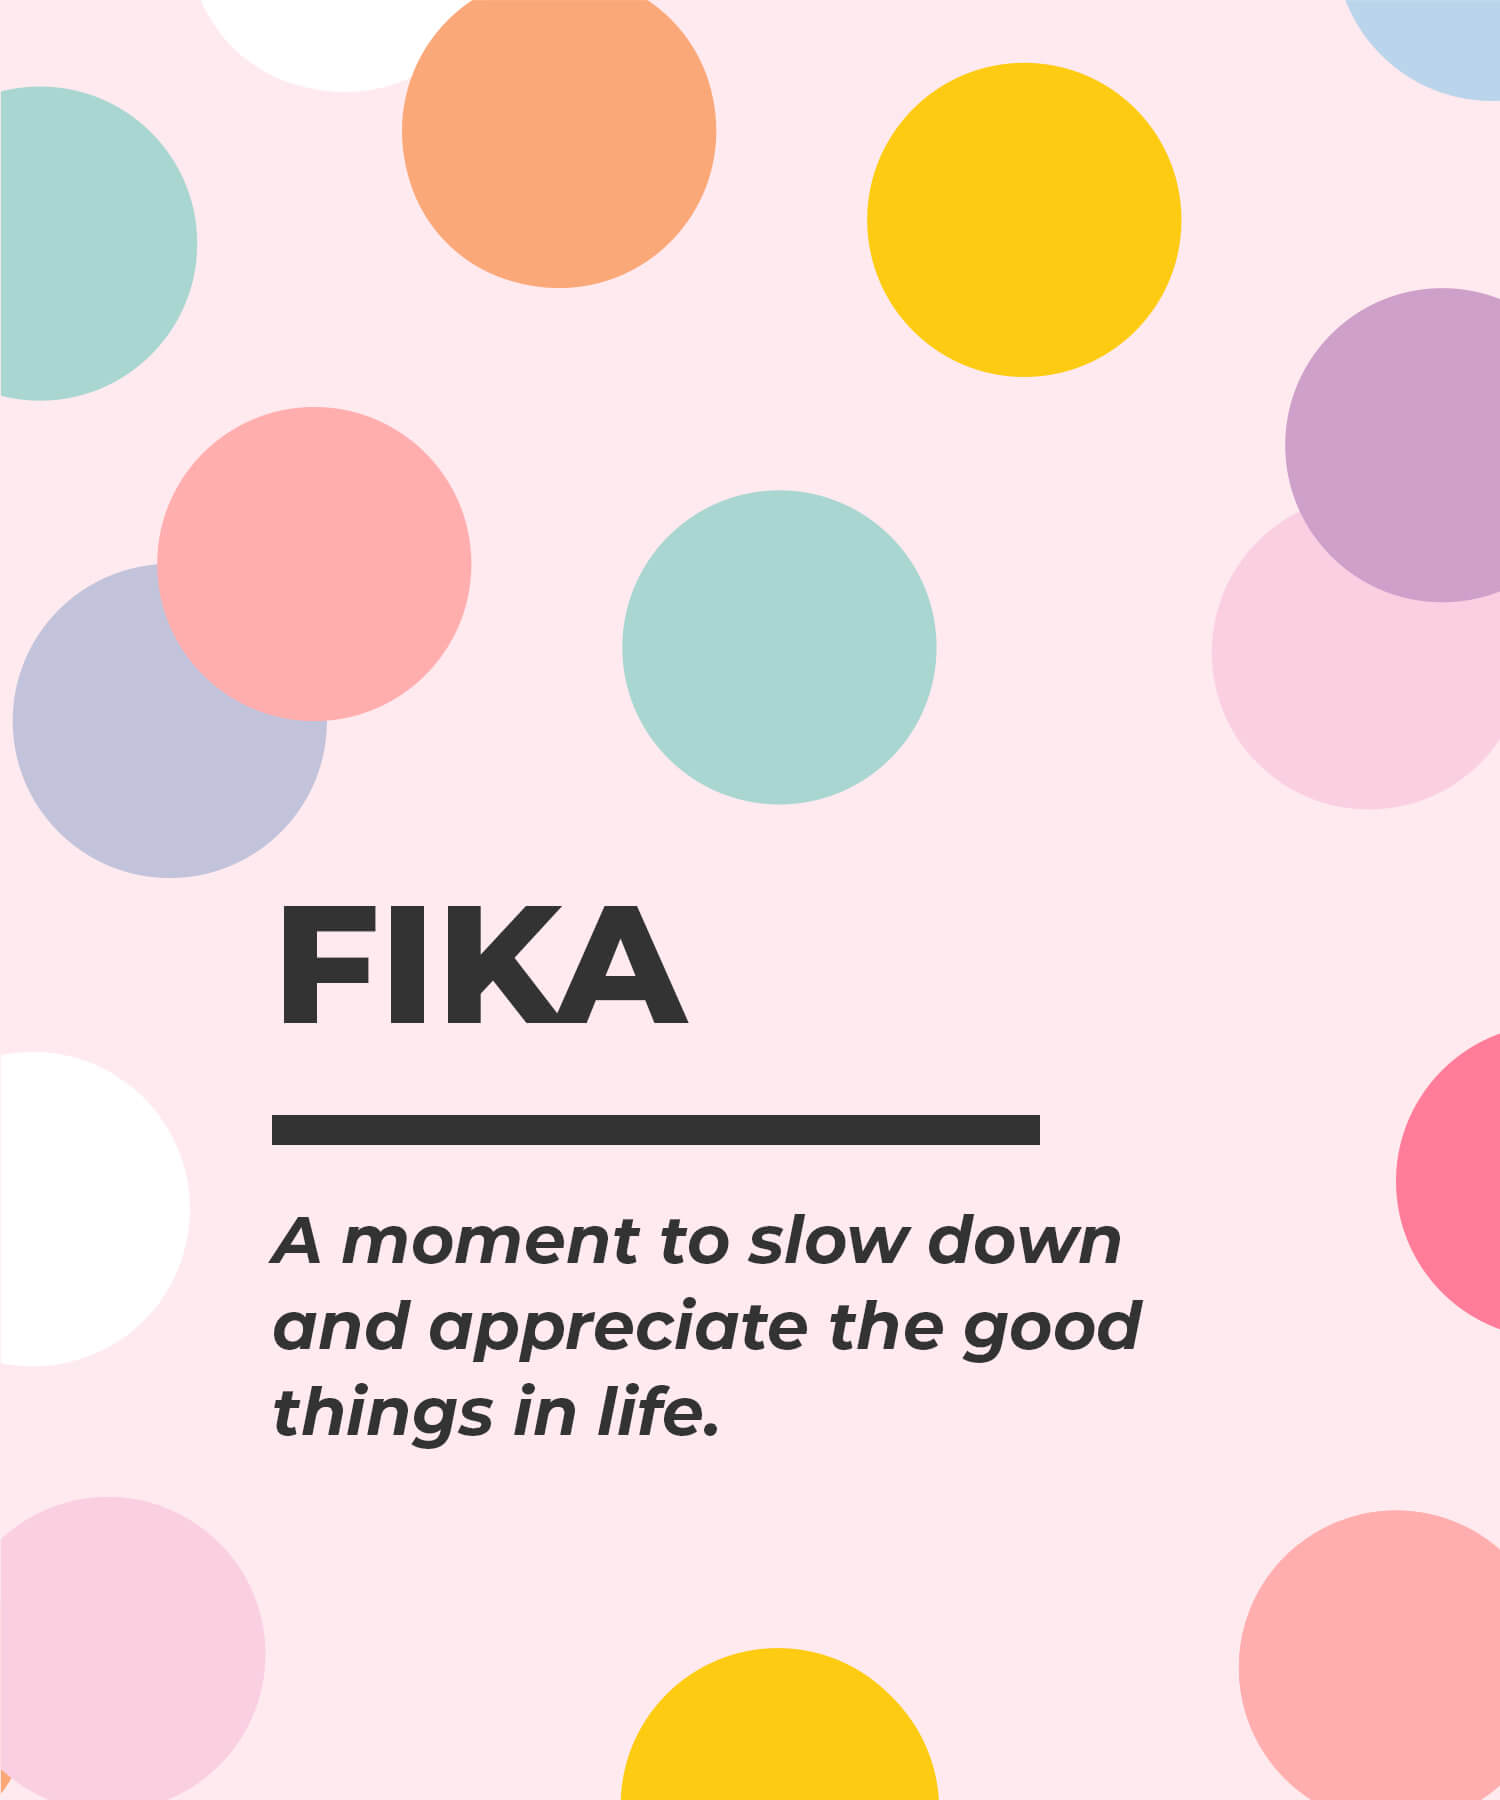 Fika – A moment to slow down and appreciate the good things in life.